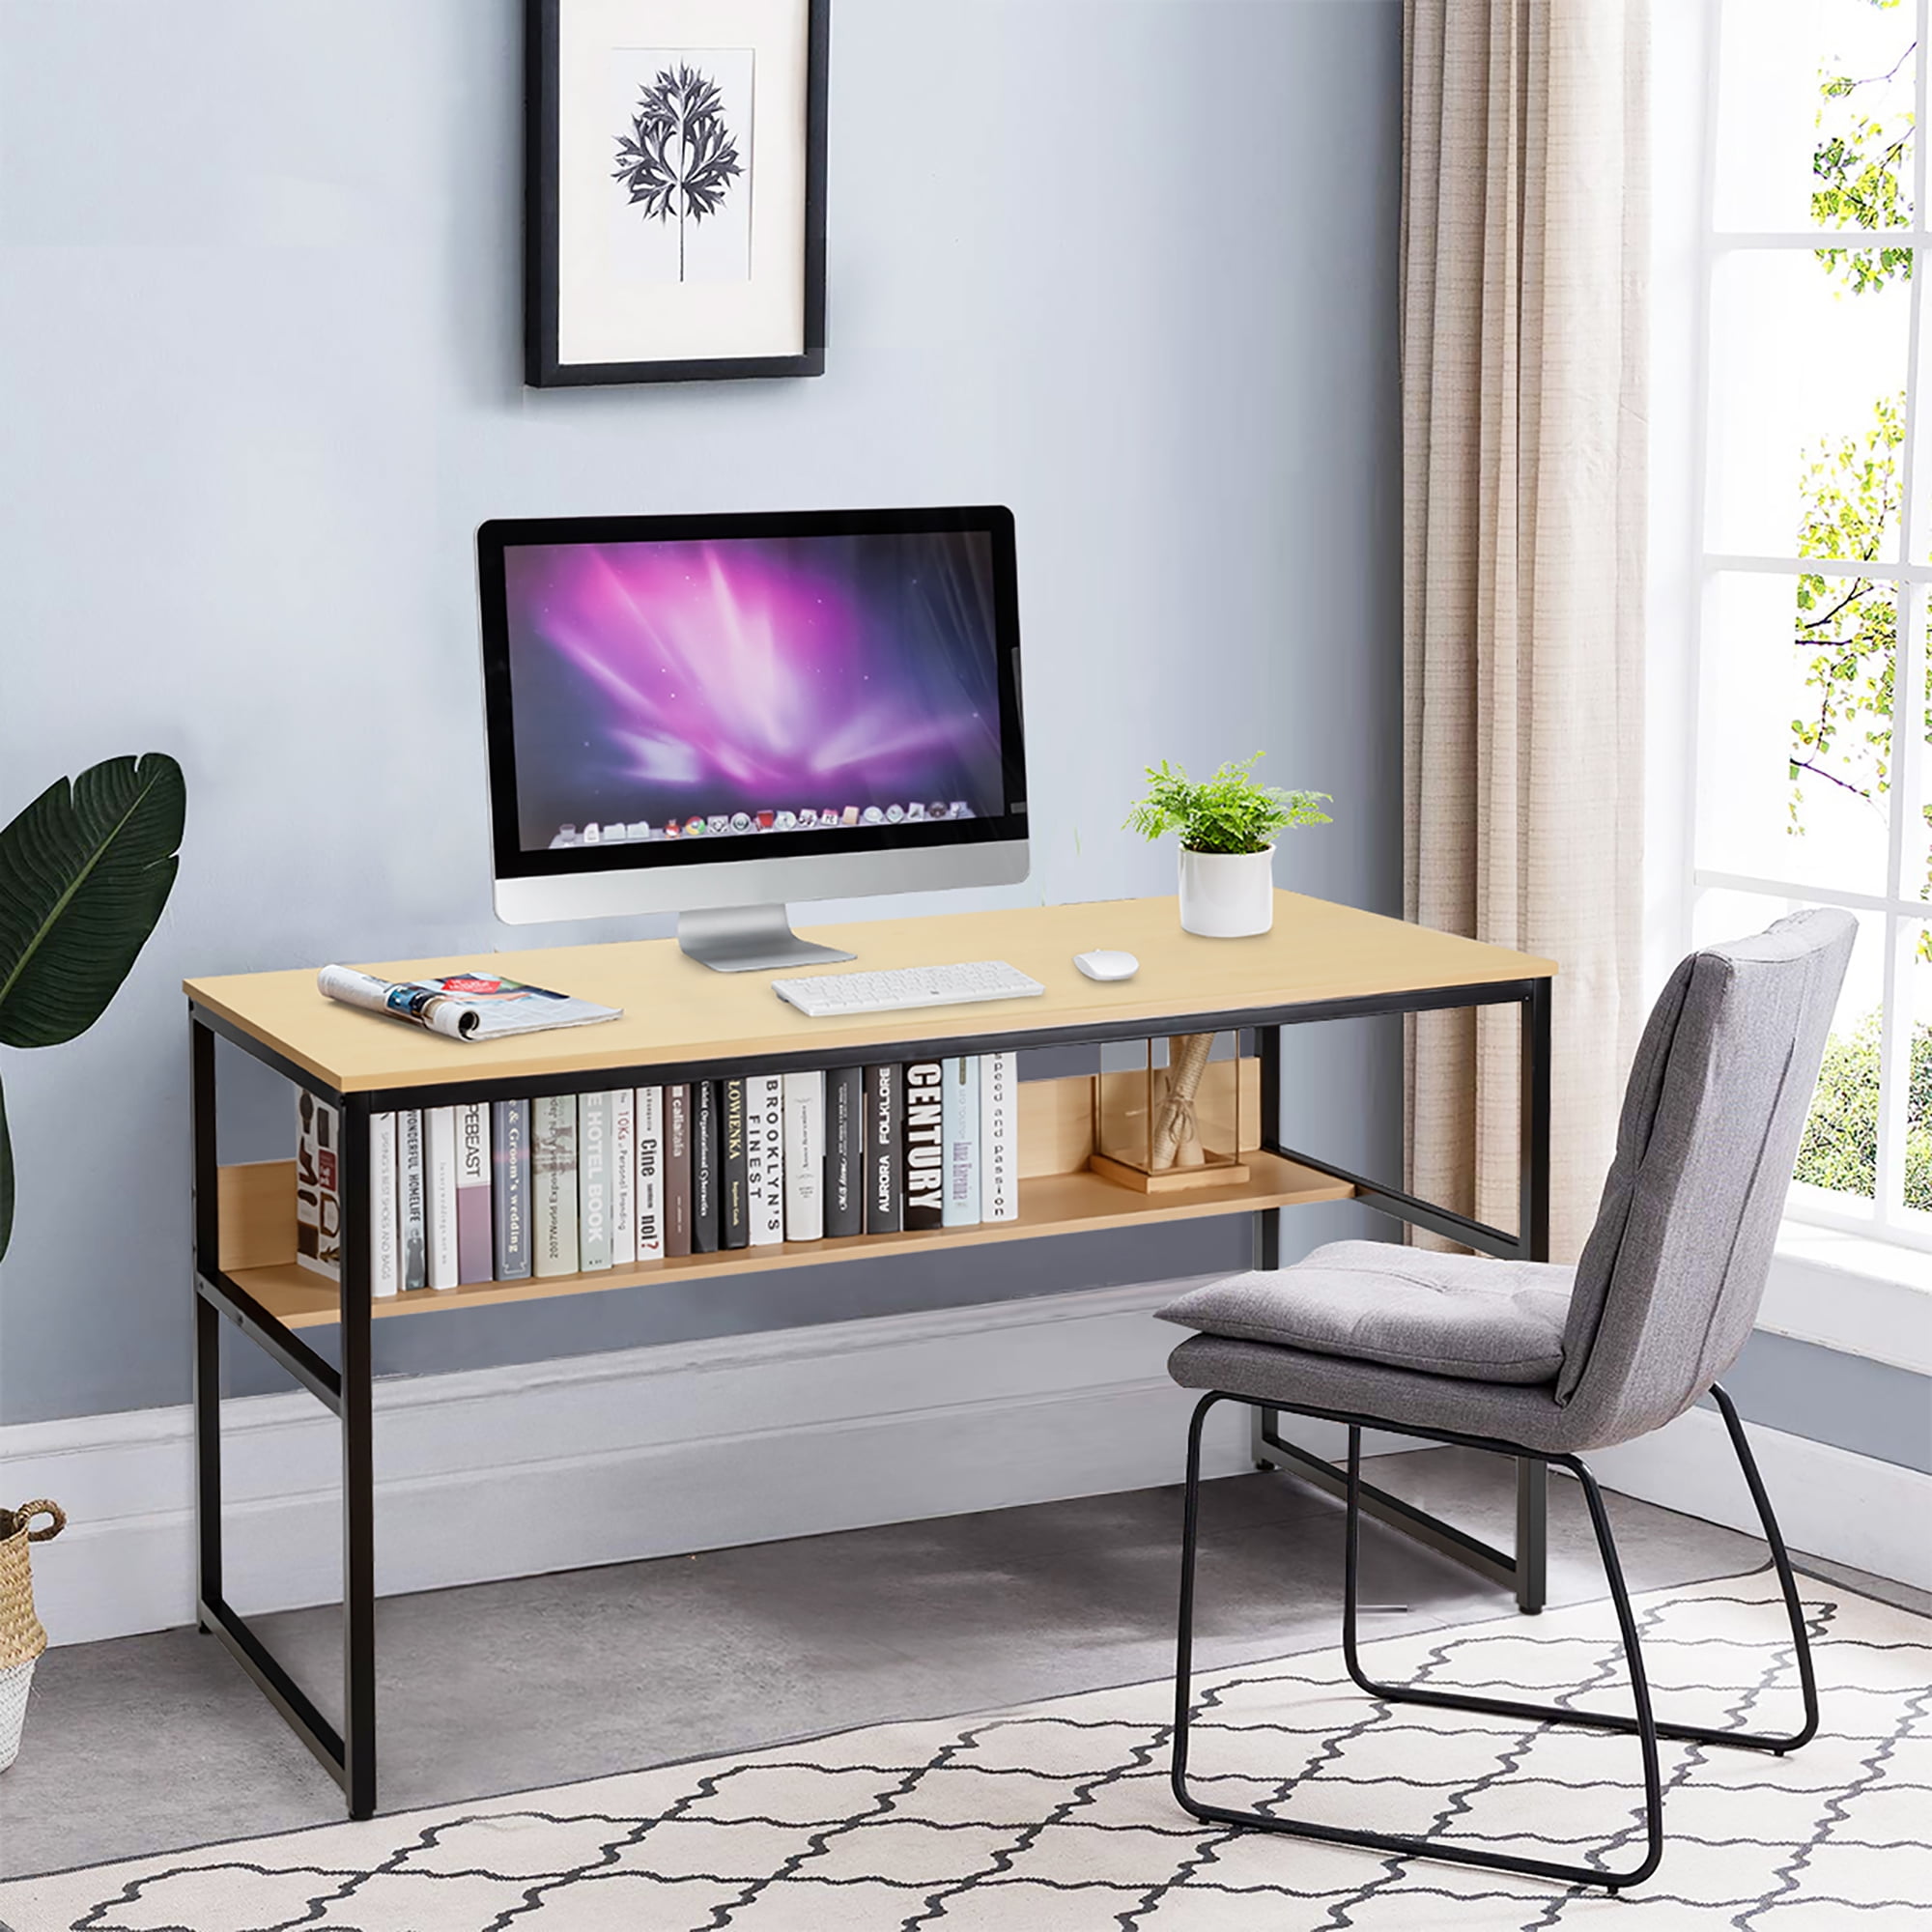 This 55-inch industrial desk overhauls your home office at $60, more from  $50 (Up to 44% off)